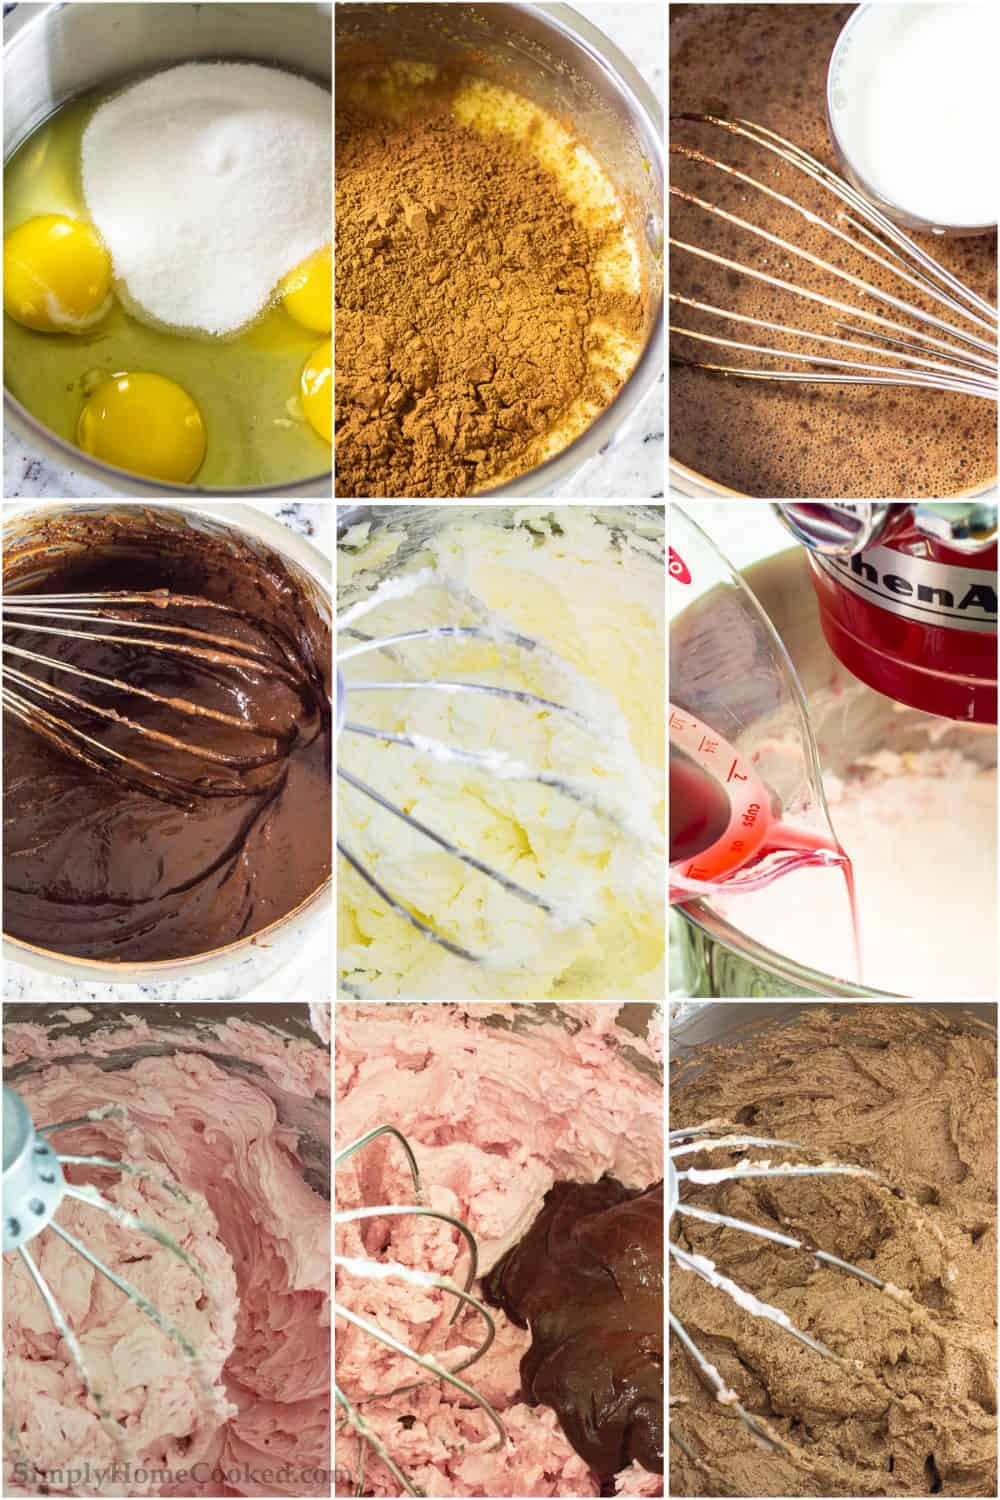 Picture tutorial of creating chocolate cream mixture, then butter and sugar mixture to blend together for the chocolate cherry cake buttercream 